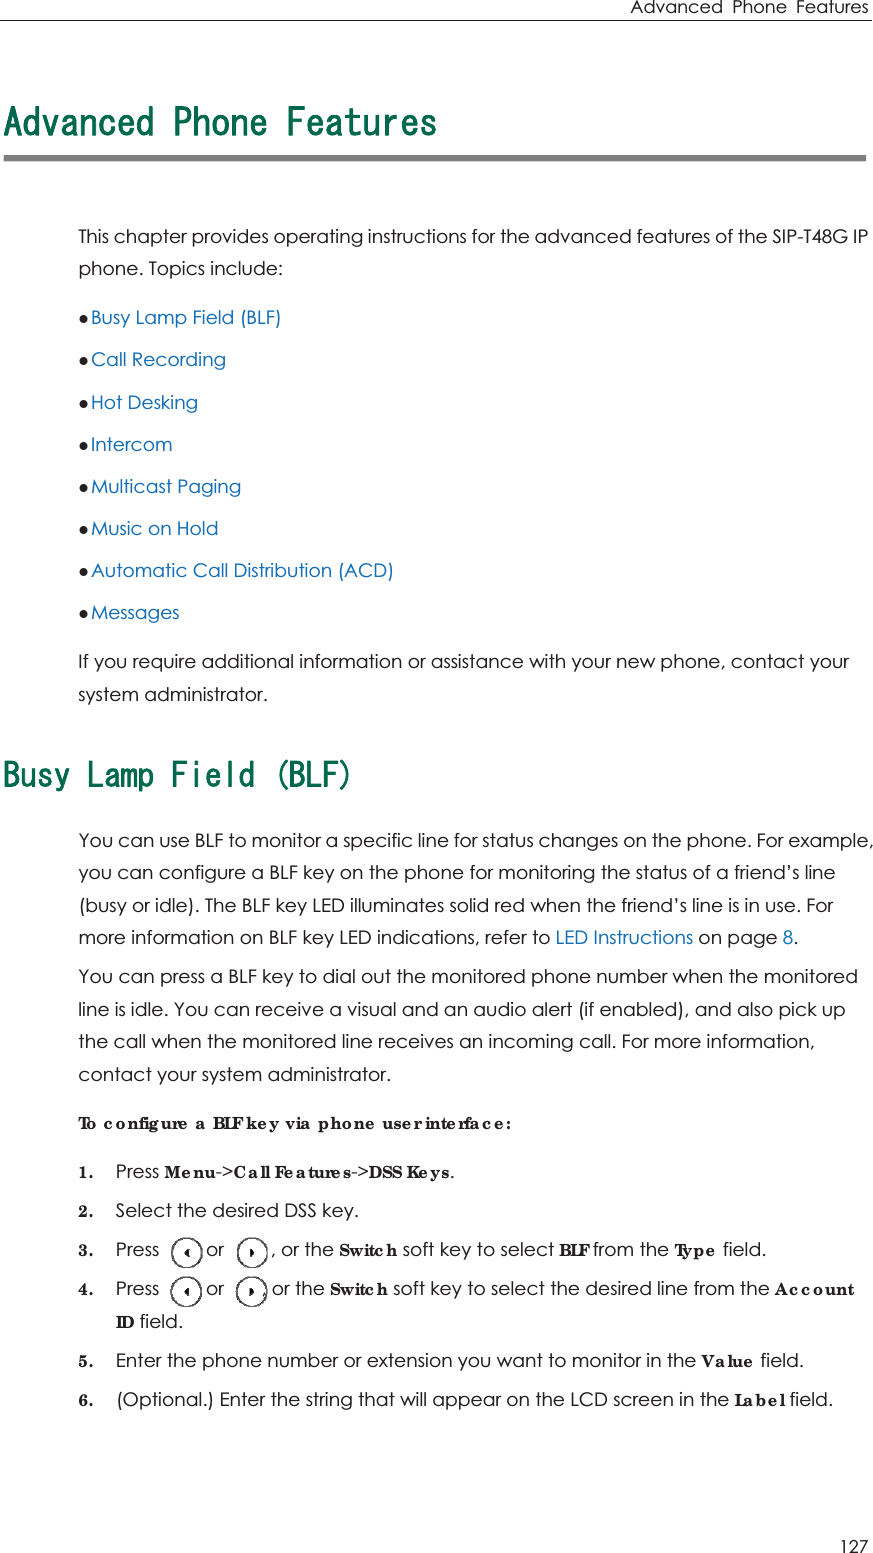 Advanced Phone Features 127 #FXCPEGF2JQPG(GCVWTGUThis chapter provides operating instructions for the advanced features of the SIP-T48G IP phone. Topics include: zBusy Lamp Field (BLF) zCall Recording zHot Desking zIntercom zMulticast Paging zMusic on Hold zAutomatic Call Distribution (ACD) zMessages If you require additional information or assistance with your new phone, contact your system administrator.$WU[.COR(KGNF$.(You can use BLF to monitor a specific line for status changes on the phone. For example, you can configure a BLF key on the phone for monitoring the status of a friend’s line (busy or idle). The BLF key LED illuminates solid red when the friend’s line is in use. For more information on BLF key LED indications, refer to LED Instructions on page 8. You can press a BLF key to dial out the monitored phone number when the monitored line is idle. You can receive a visual and an audio alert (if enabled), and also pick up the call when the monitored line receives an incoming call. For more information, contact your system administrator. To configure a BLF key via phone user interface: 1. Press Menu-&gt;Call Features-&gt;DSS Keys. 2. Select the desired DSS key. 3. Press     or     , or the Switch soft key to select BLF from the Type field. 4. Press     or    , or the Switch soft key to select the desired line from the AccountID field. 5. Enter the phone number or extension you want to monitor in the Value field. 6. (Optional.) Enter the string that will appear on the LCD screen in the Label field. 